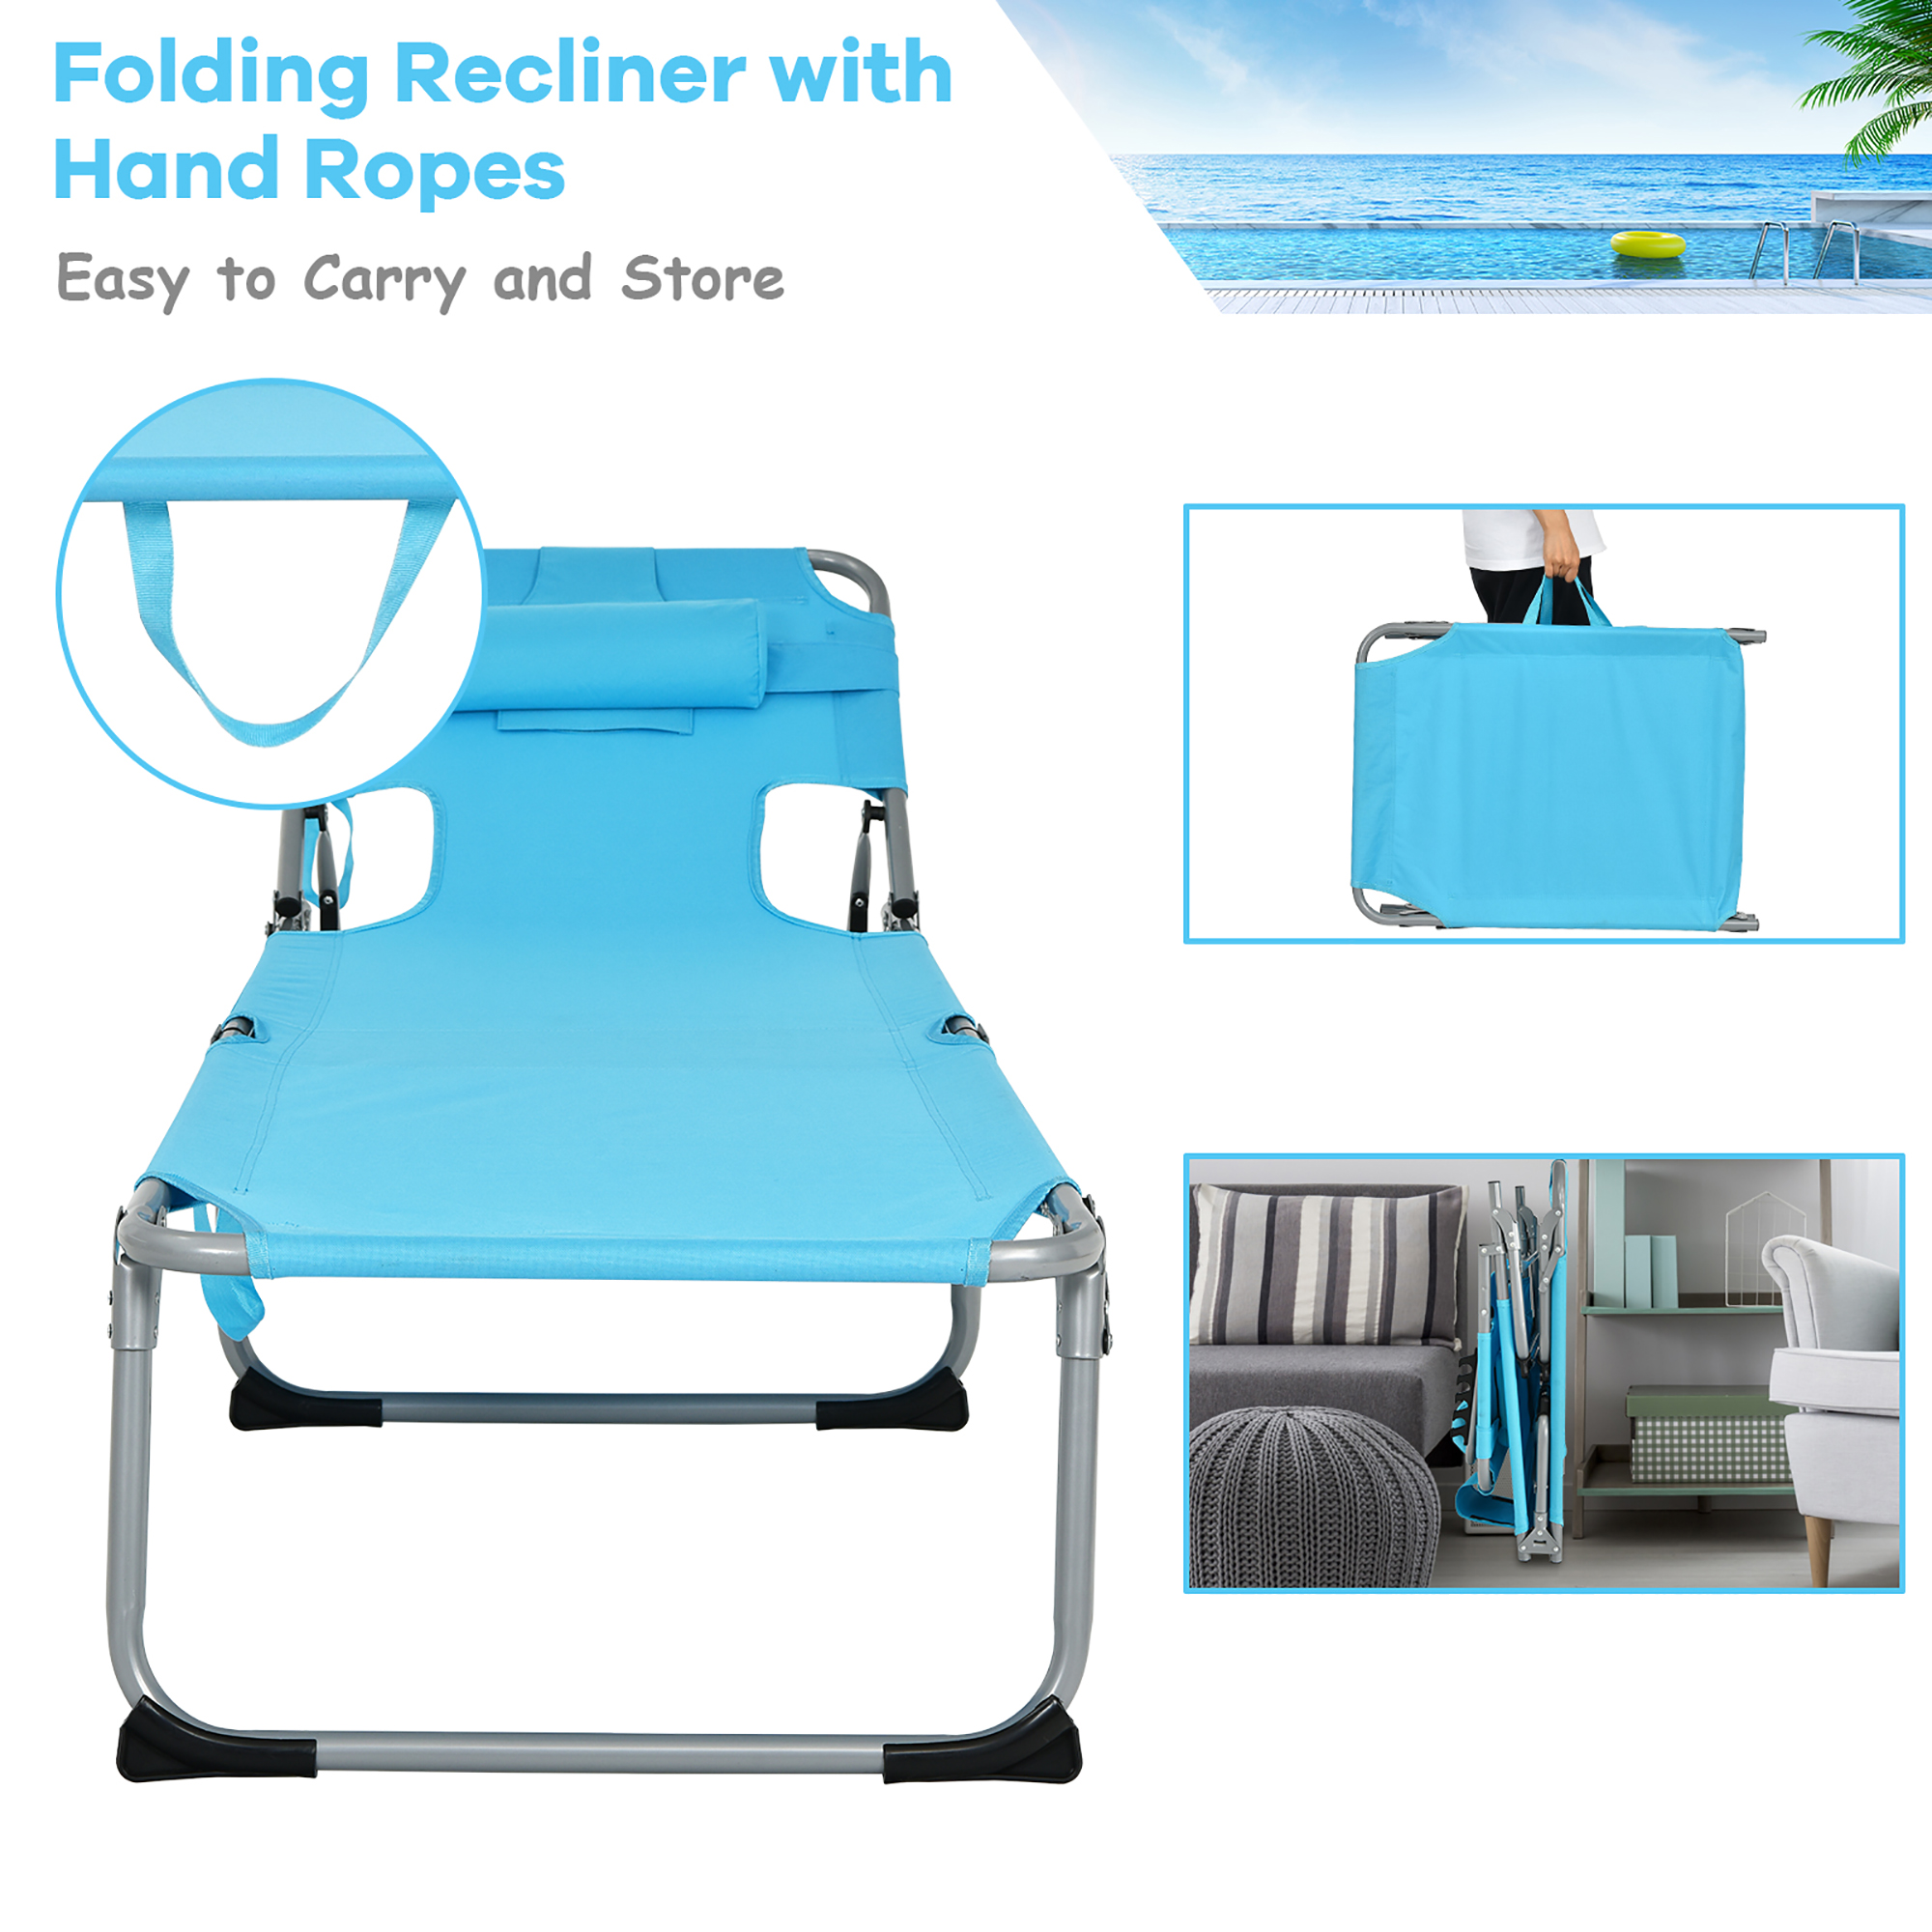 Goplus Outdoor Beach Lounge Chair Folding Chaise Lounge with Pillow Turquoise - image 5 of 8